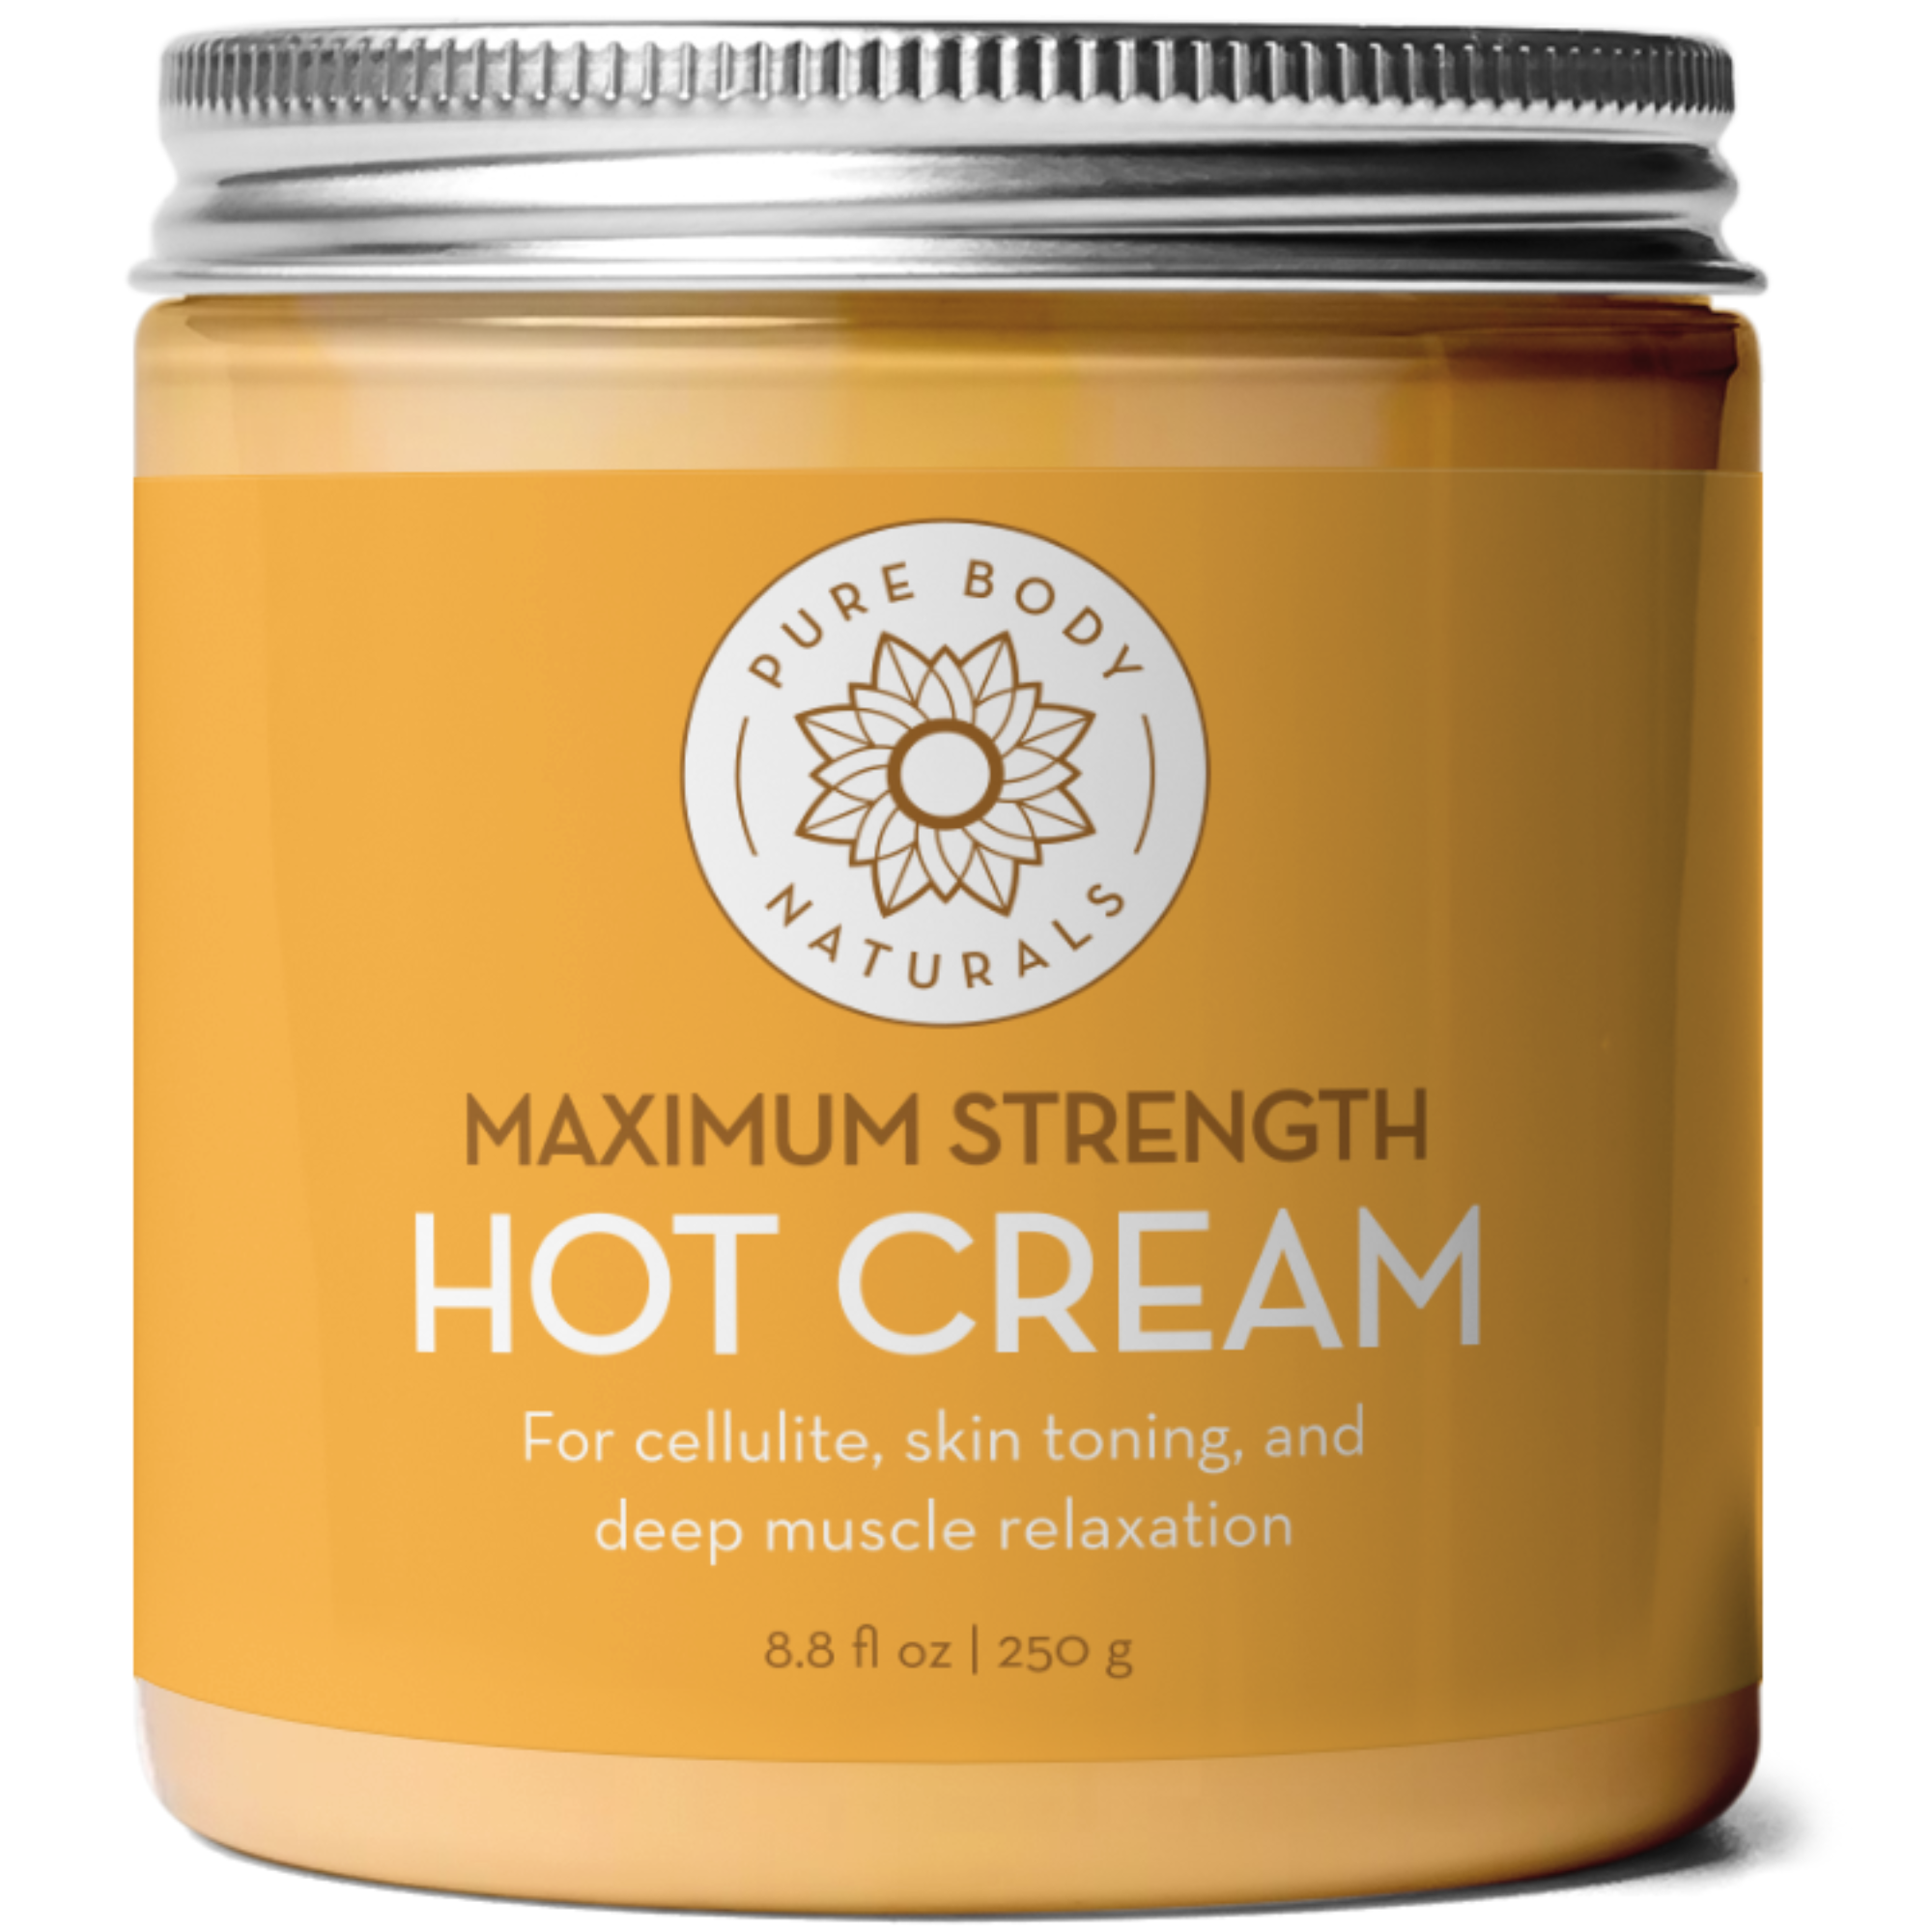 Maximum Strength Hot Cream for Arthritis Pain, Sore Muscle 8.8 fl oz by Pure Body Naturals - image 1 of 7